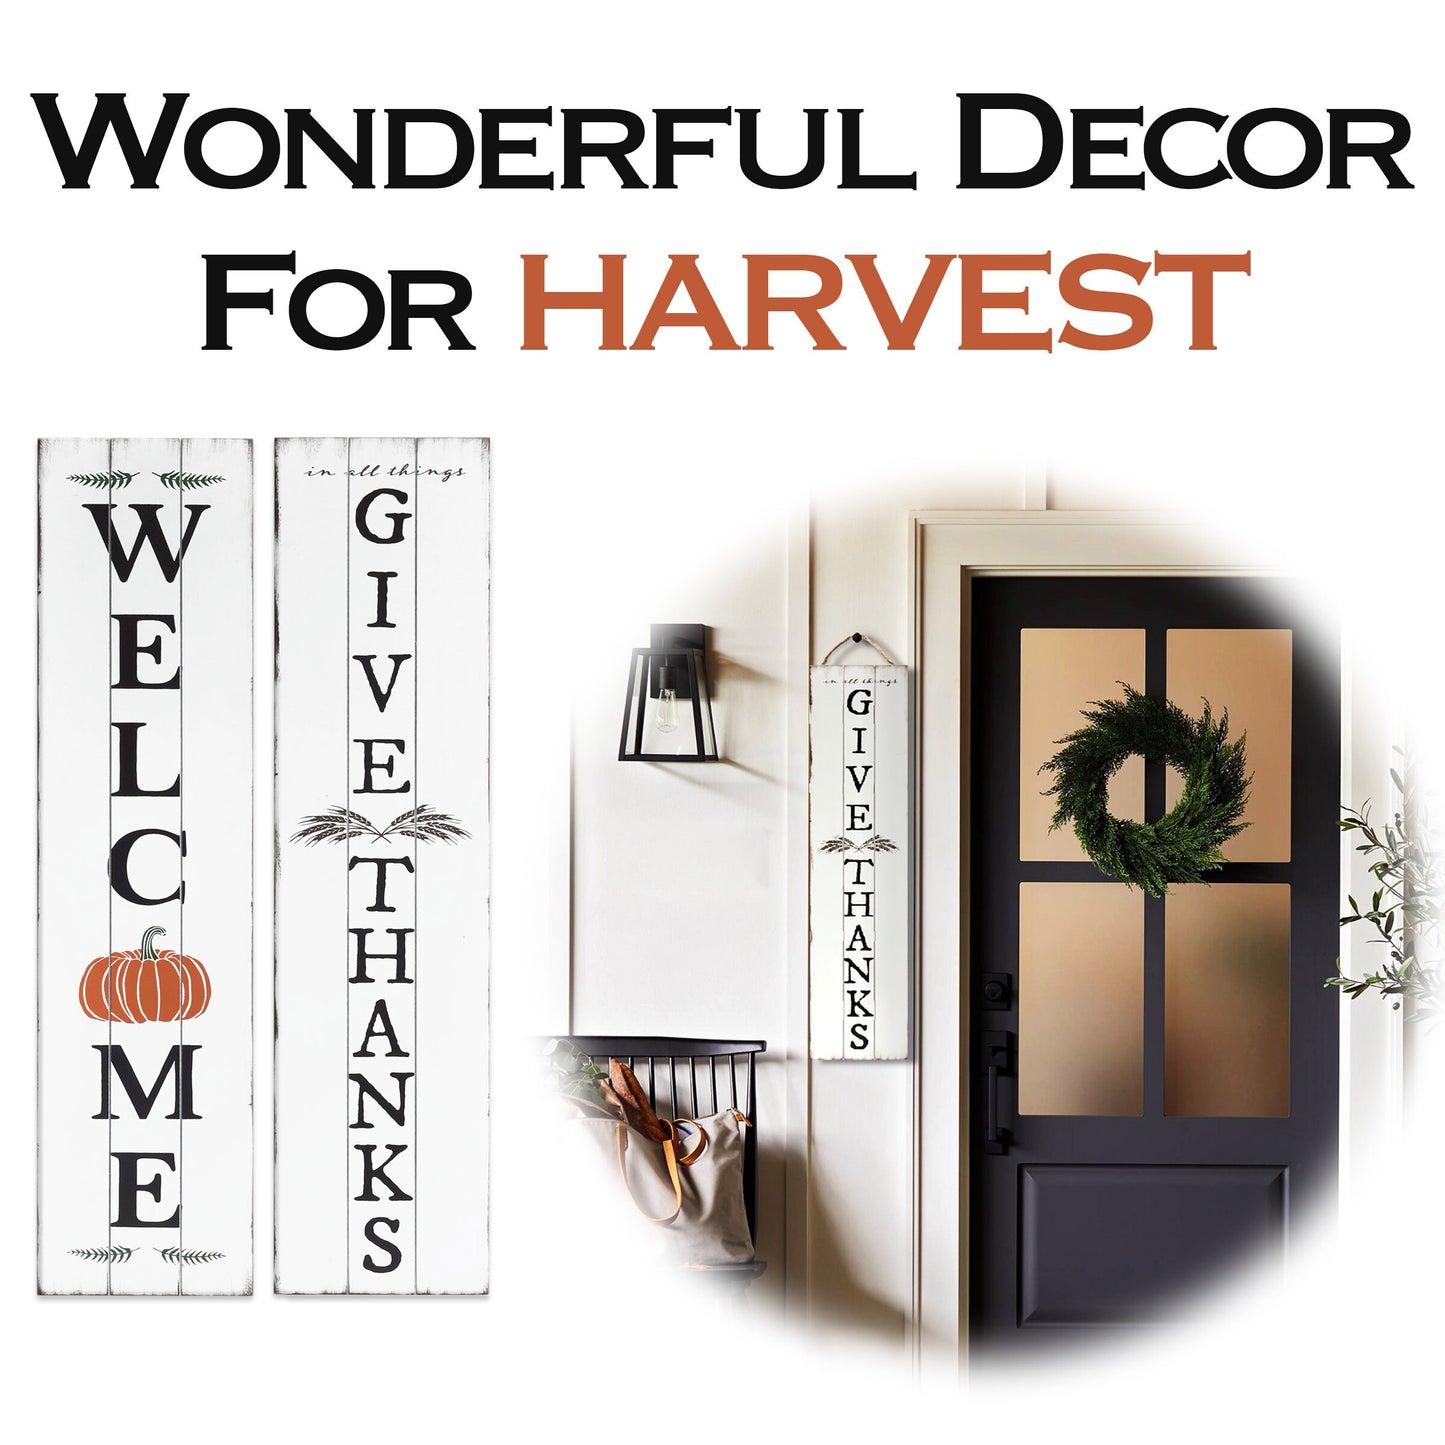 Fall Sign for Home Decor | Fall Welcome Sign for Front Door | Fall Welcome Sign | Reversible Vertical Porch Sign